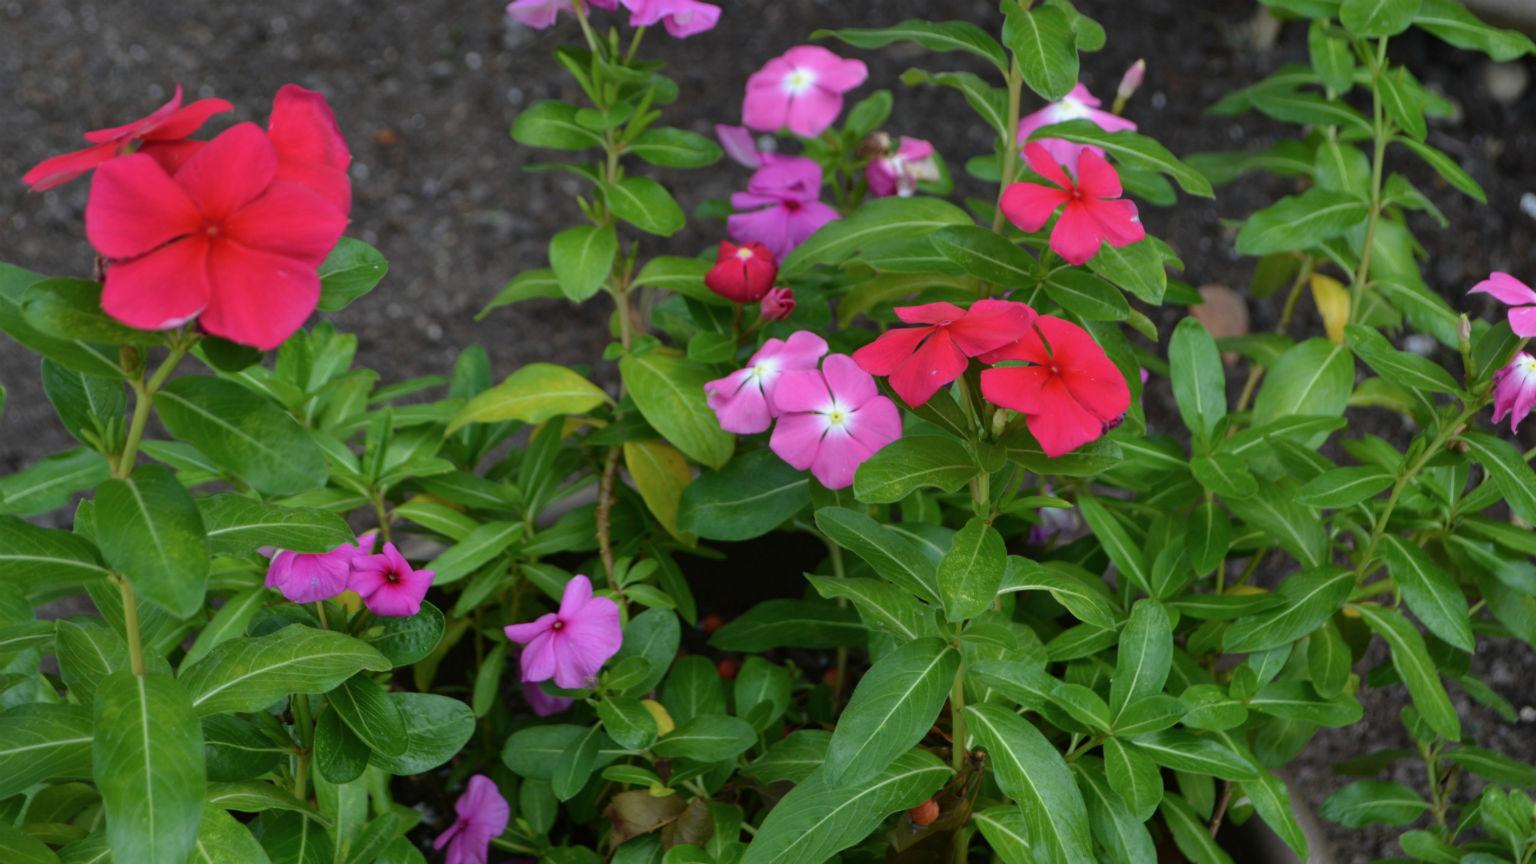 Described by Doel Sojearto as the “icon of the garden,” the study of Madagascar periwinkle has led to the development of two different drugs that are used to treat a variety of cancers. (Kristen Thometz / Chicago Tonight)